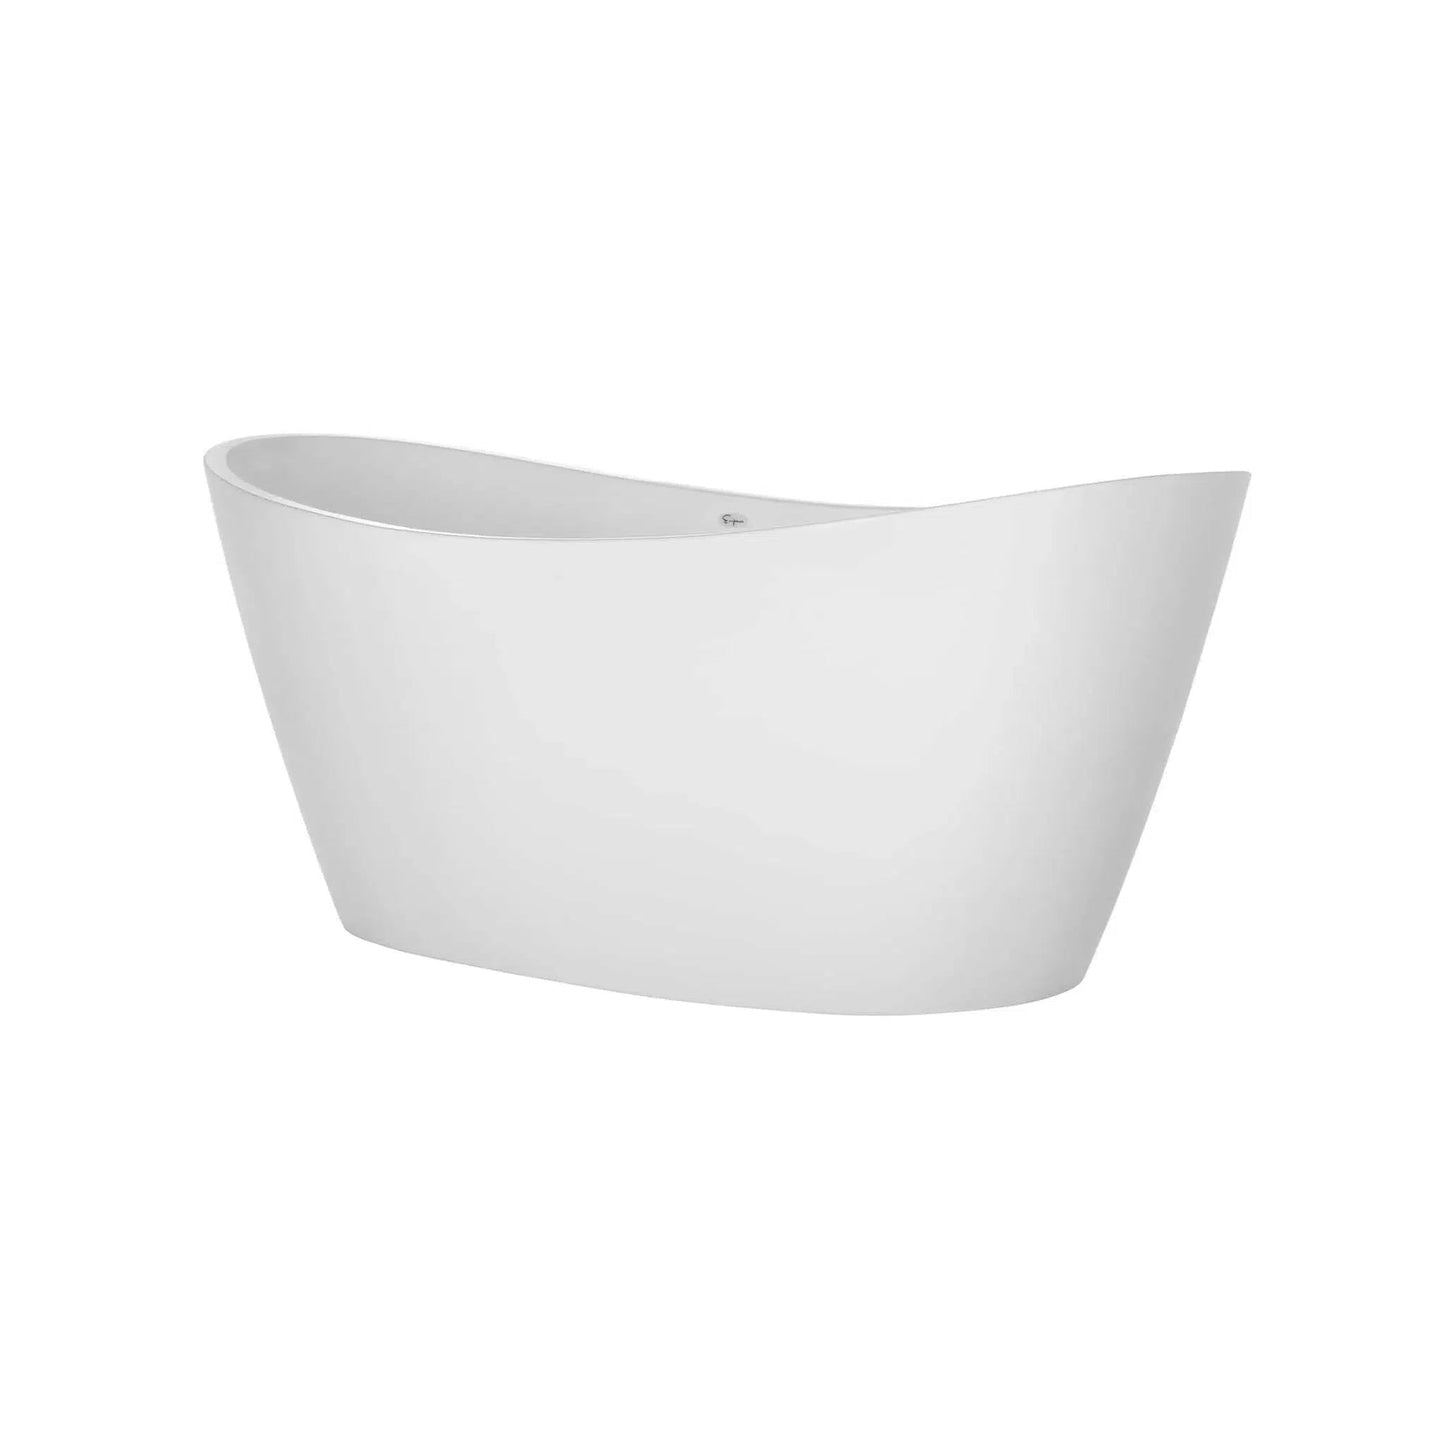 Empava 59" White Freestanding Oval Soaking Bathtub With LED Strip Below With Center Drain